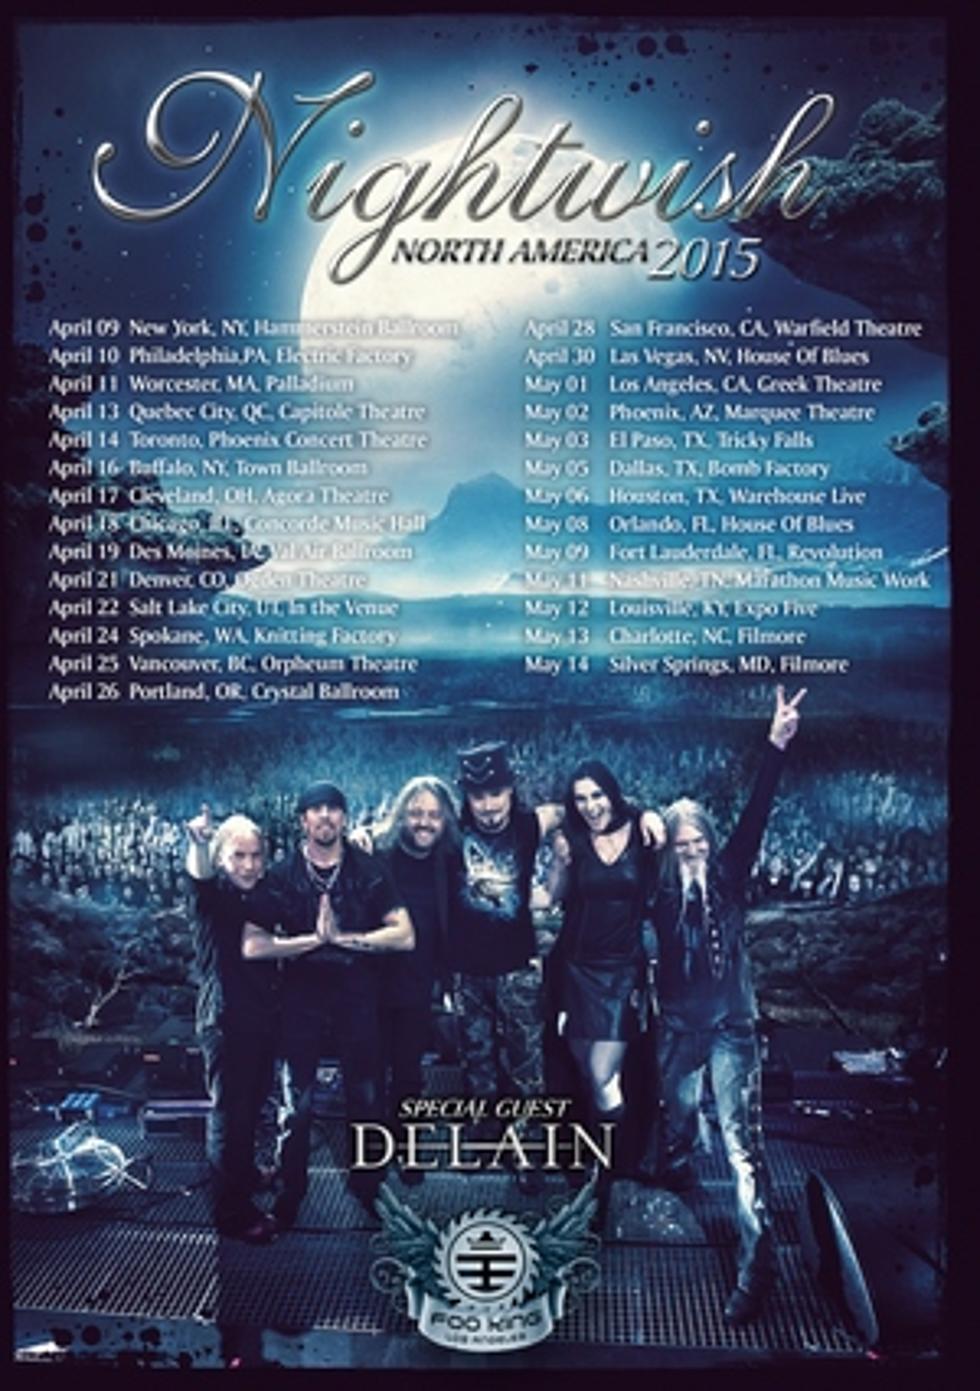 Nightwish Reveal Dates for Spring 2015 North American Tour